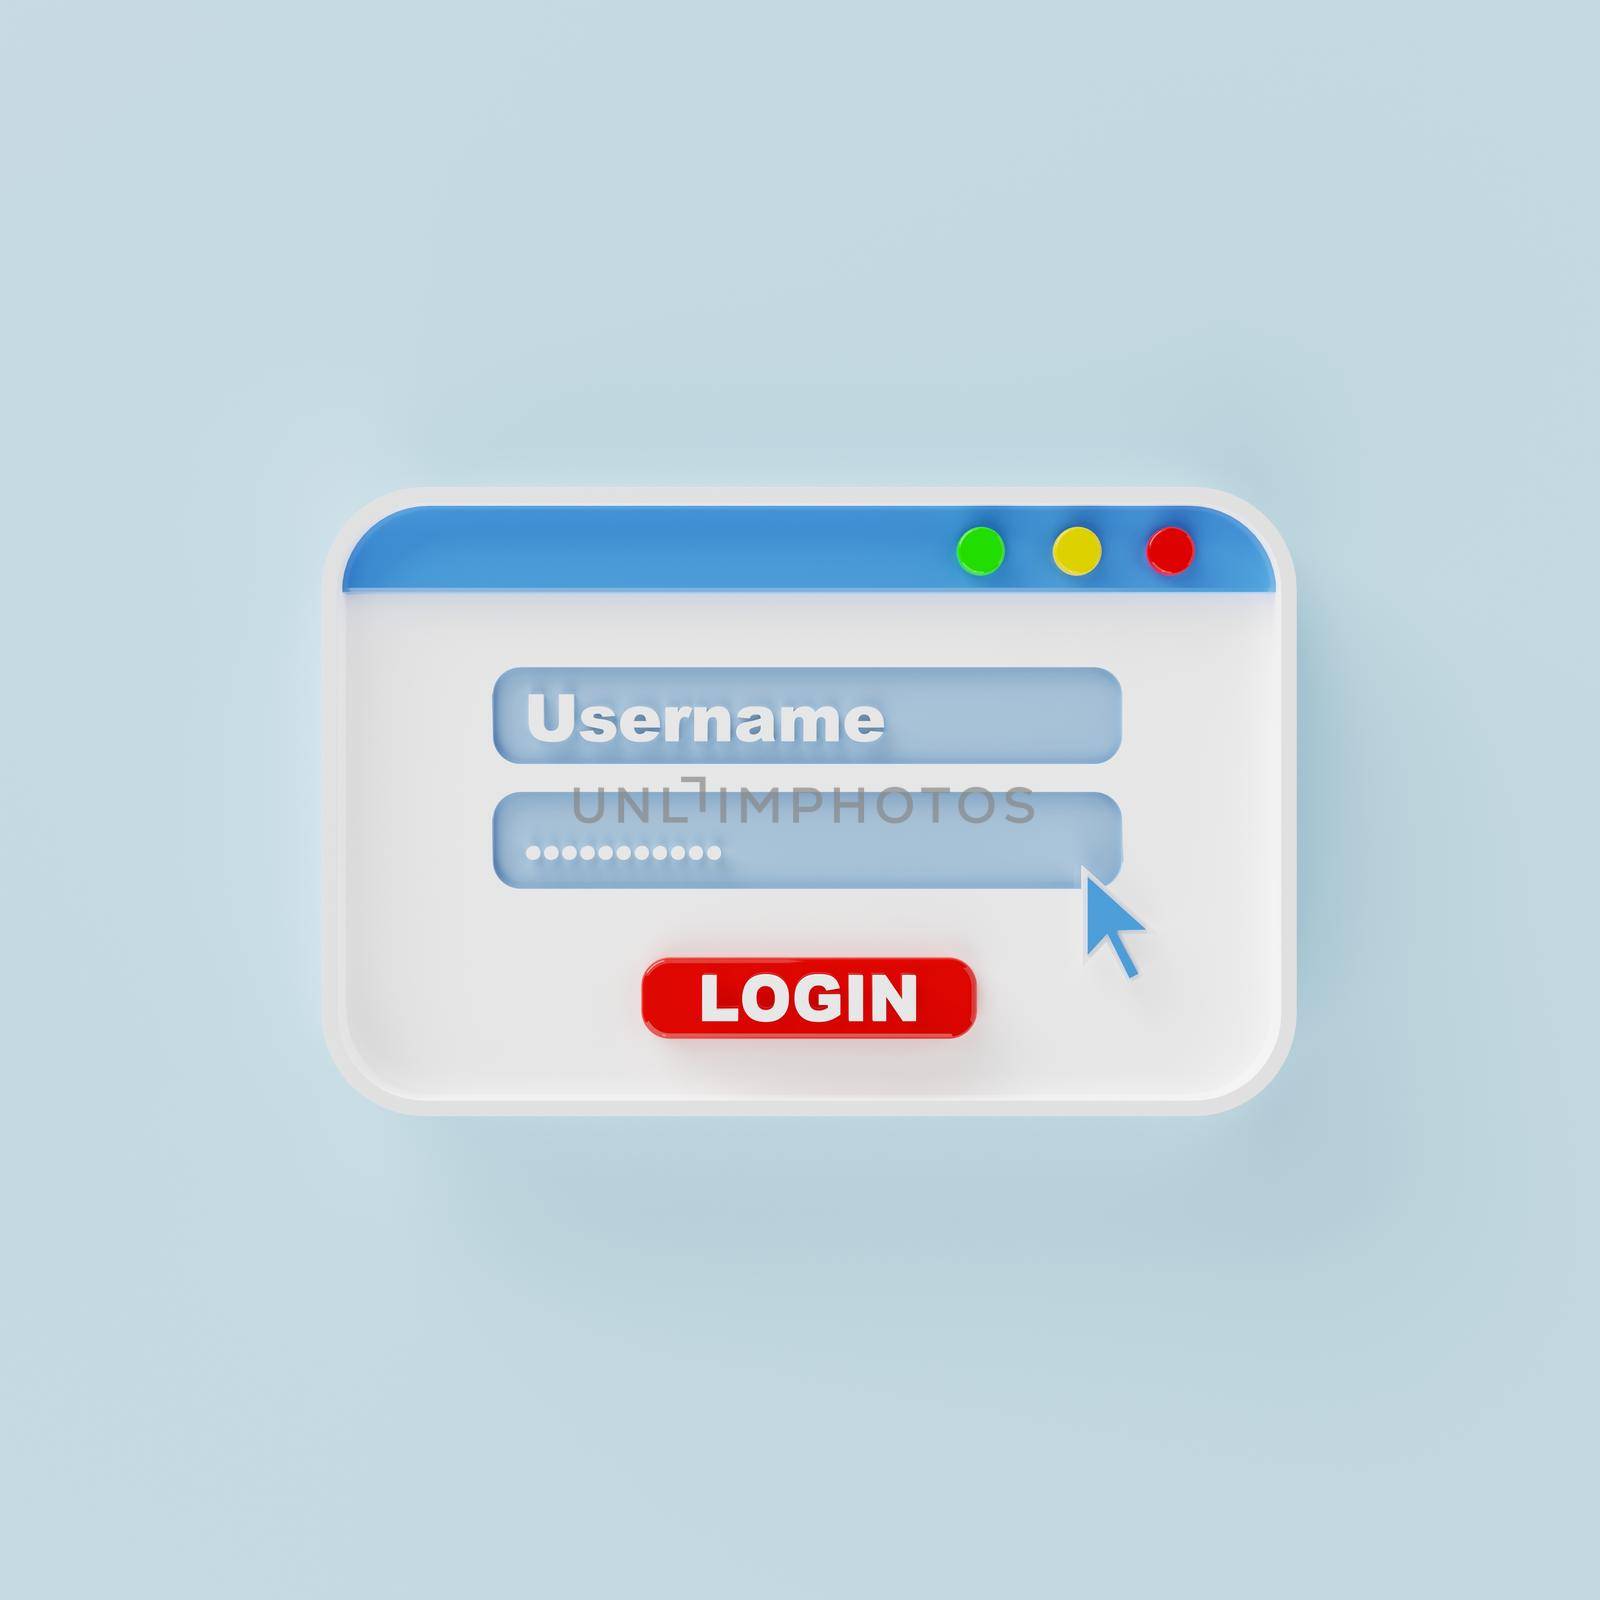 Login Username and password user interface pop-up window on blue background. Computer operating system internet browser and social network concept. 3D illustration rendering by MiniStocker